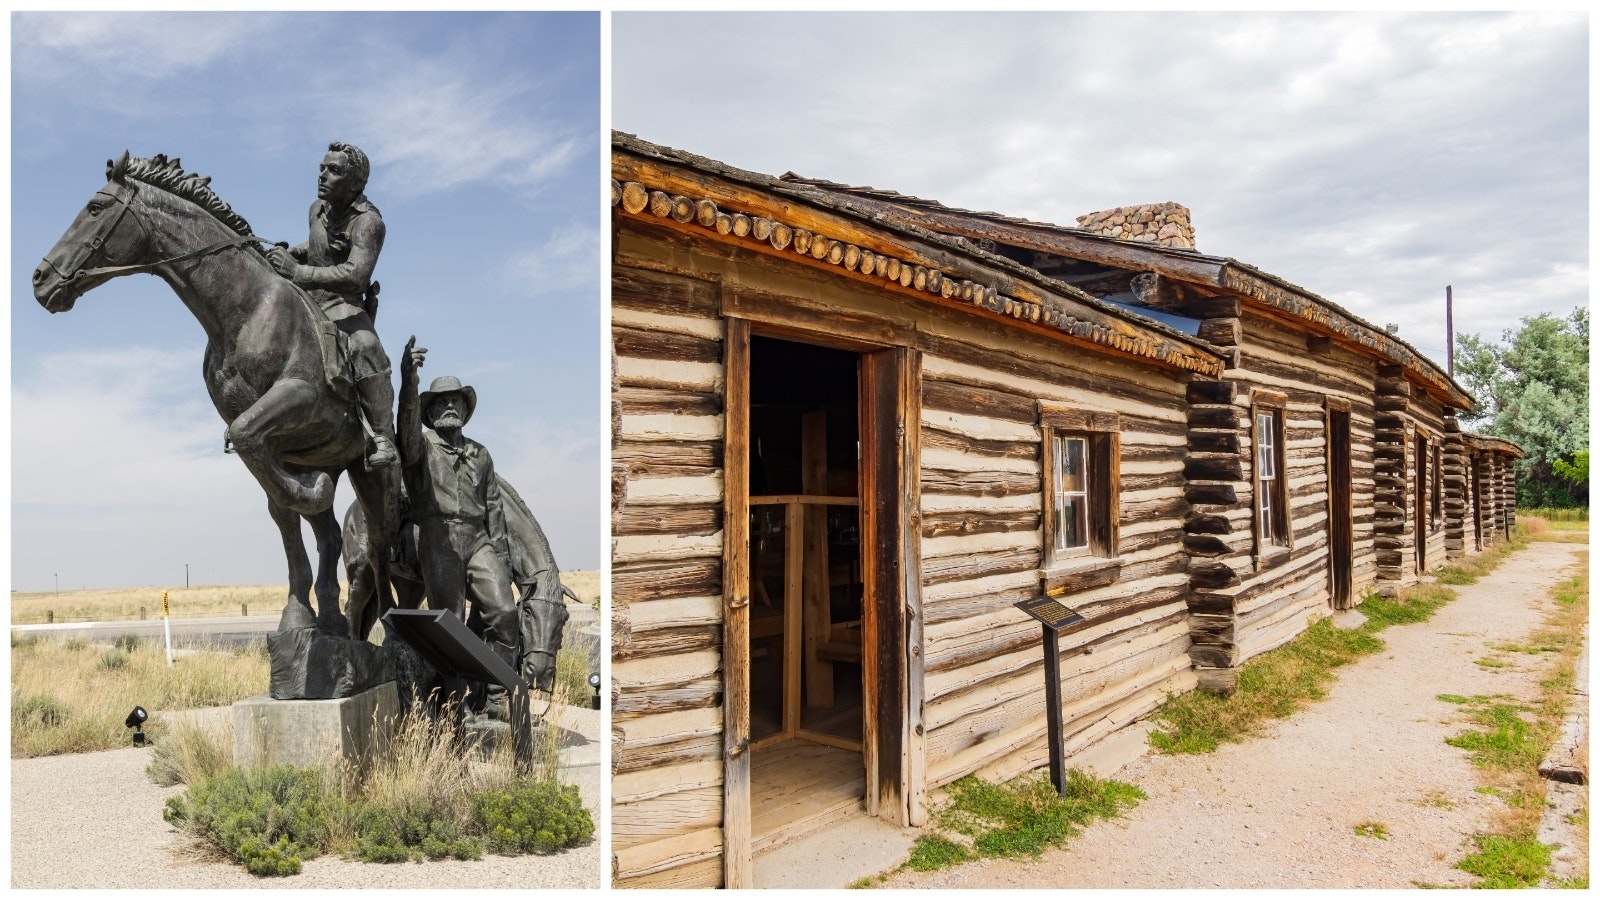 A large sculpture marking the Pony Express' history through Wyoming is in Casper, along with the historic Fort Caspar.